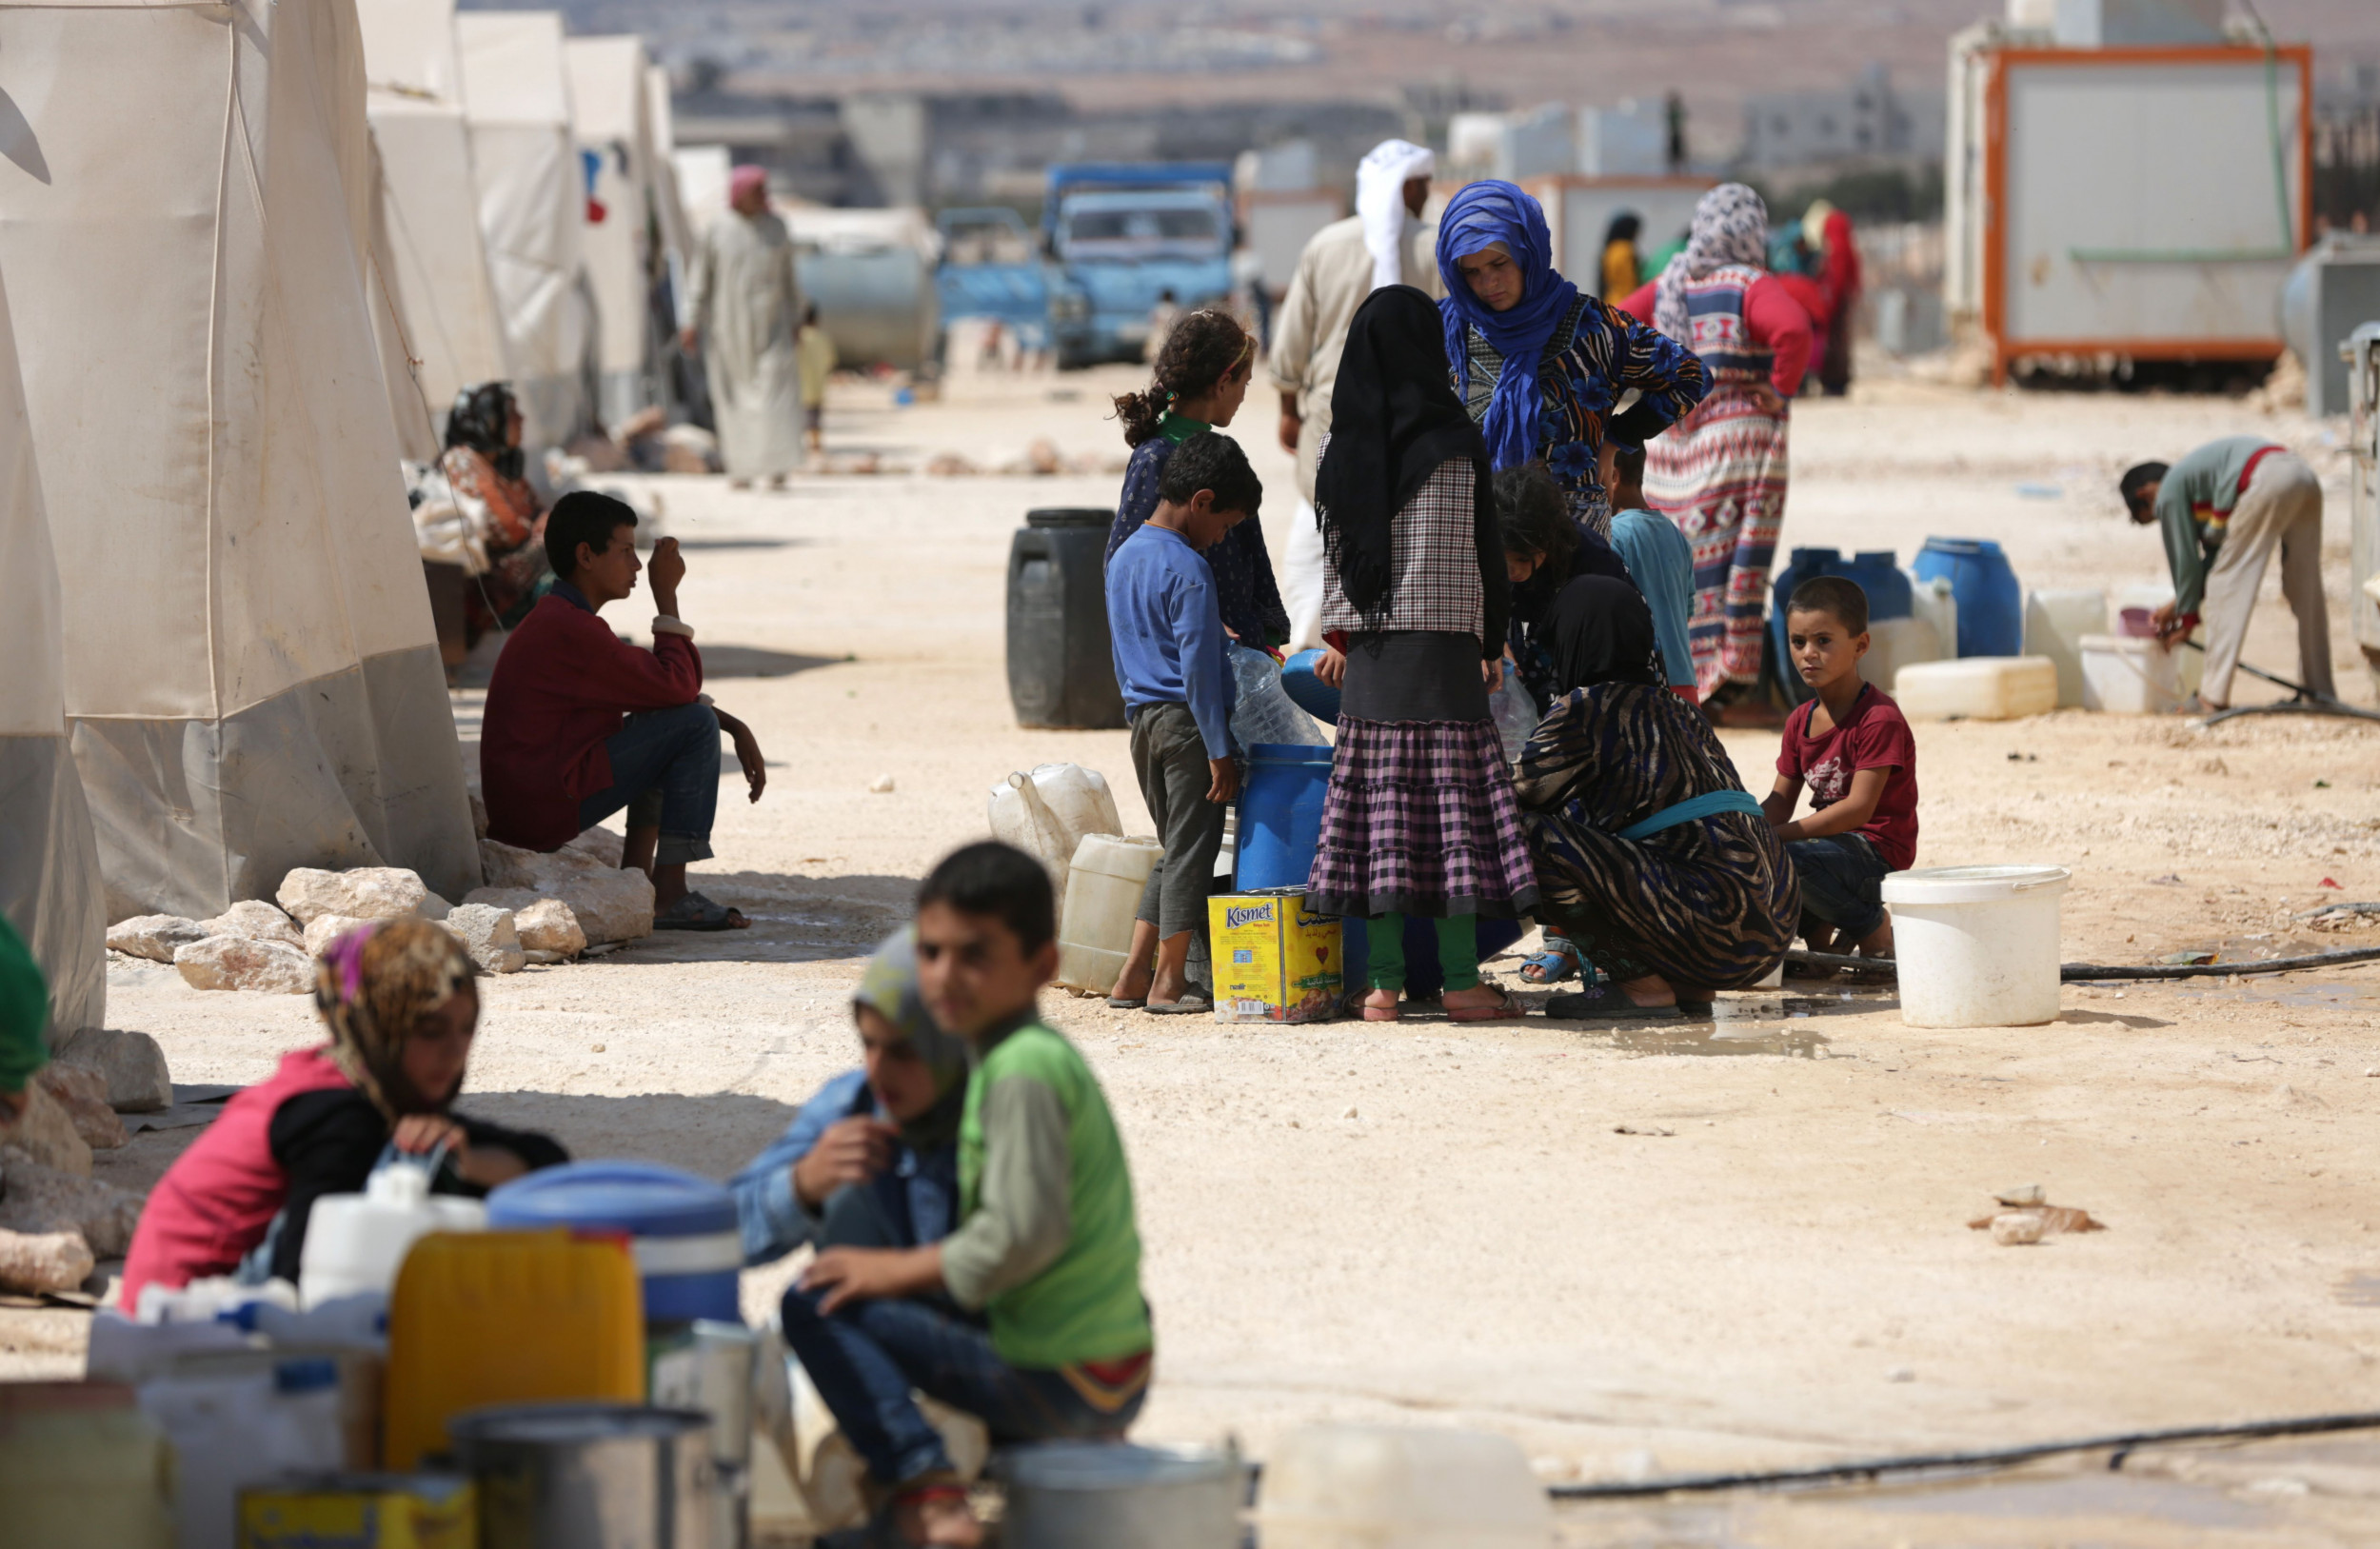 Syrians 'Trapped' in Overcrowded Tent Camps Forced to Trade Final Possessions so Children Can Eat